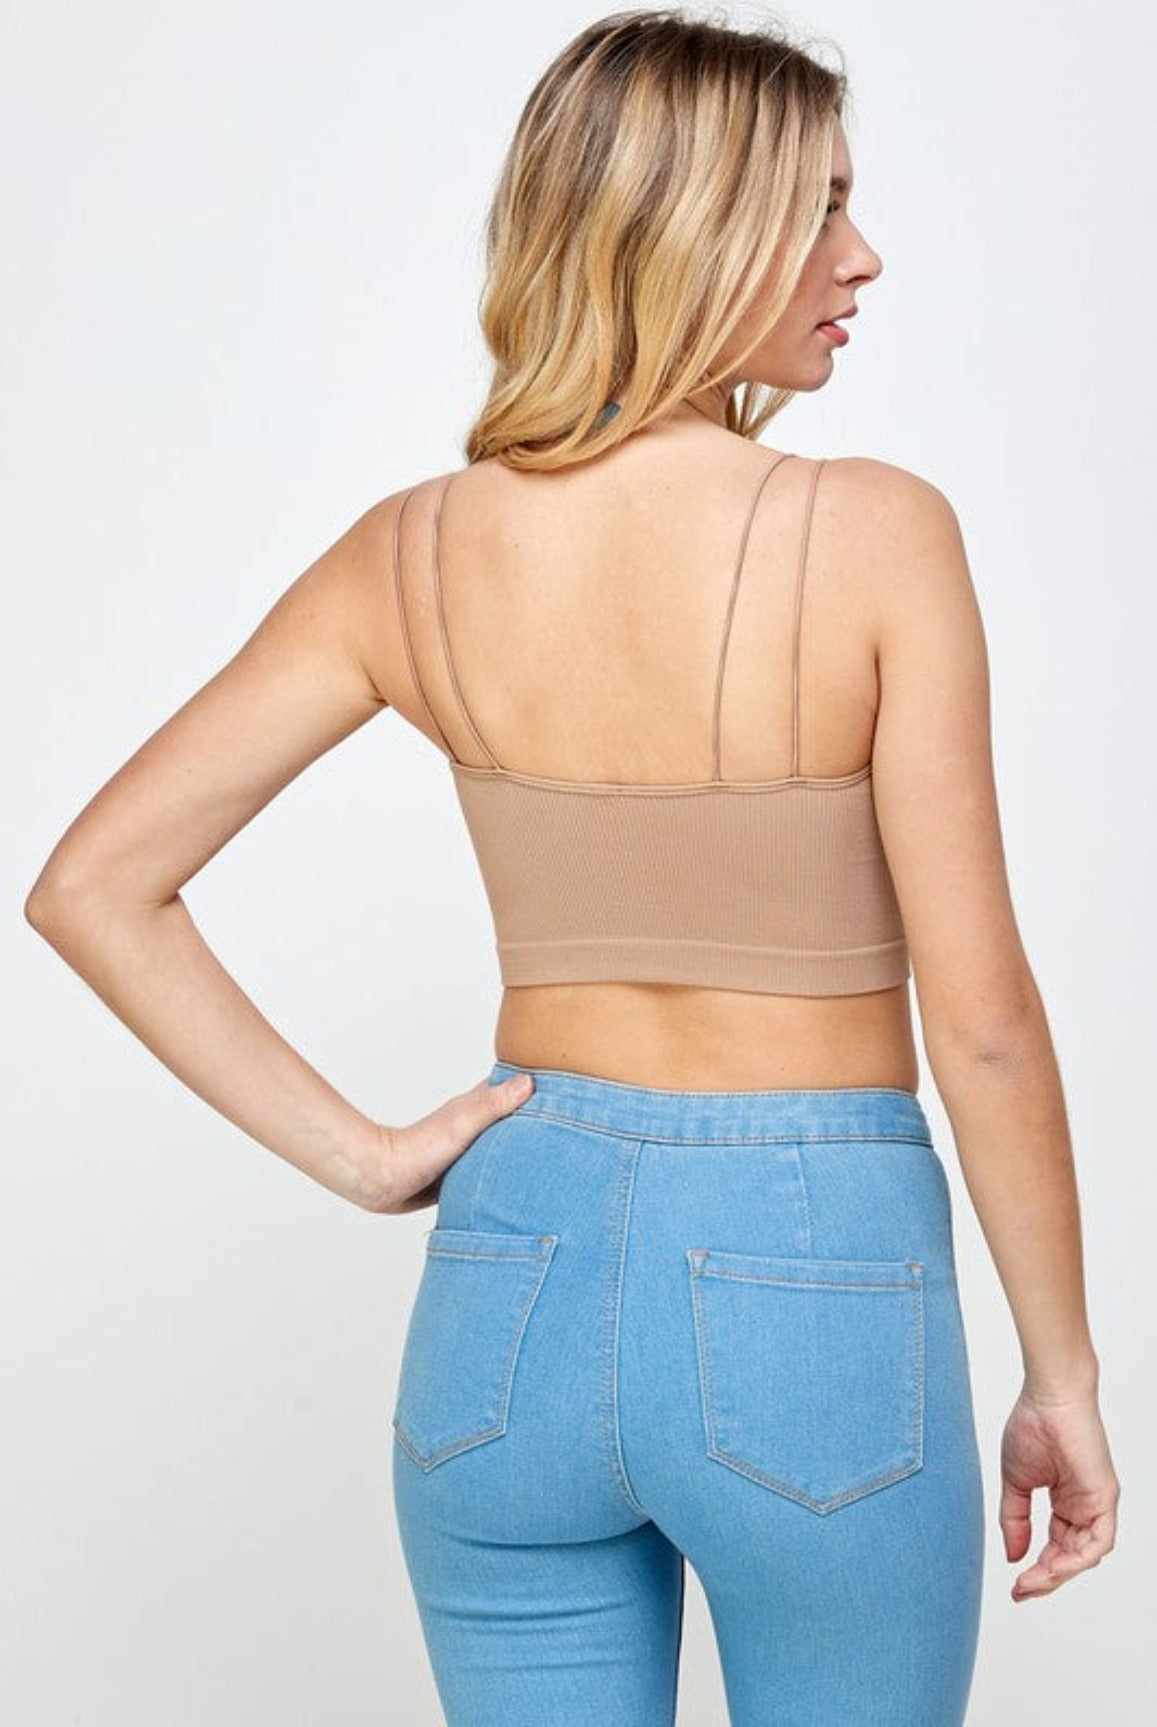 Abby.....Double String Cami Crop Top